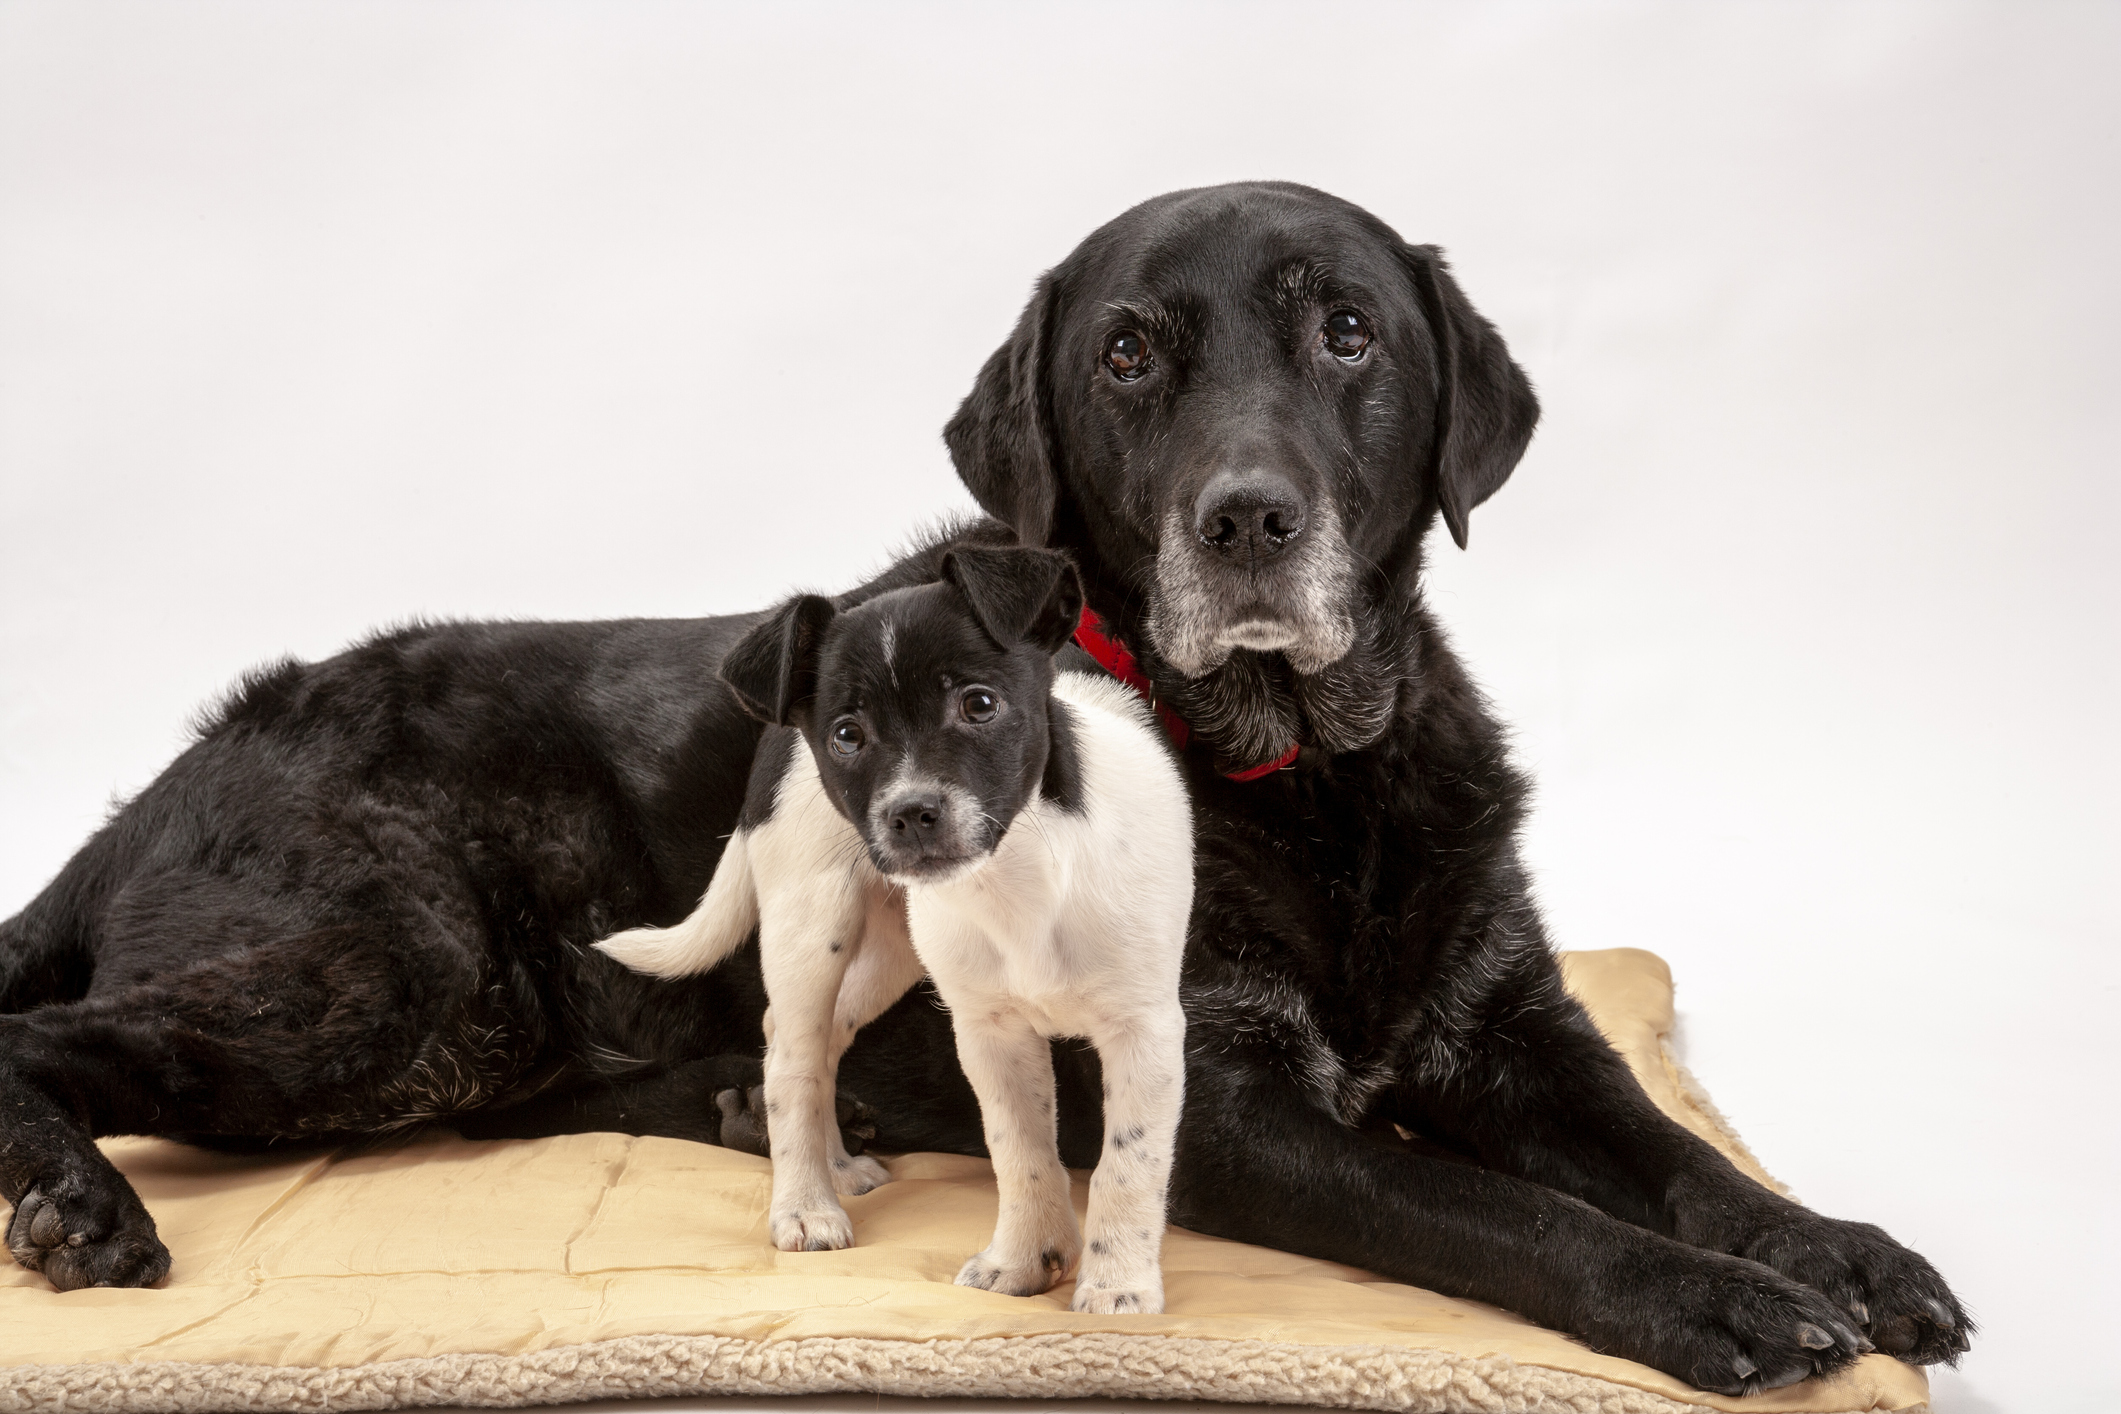 How to Introduce a Puppy to an Older Dog